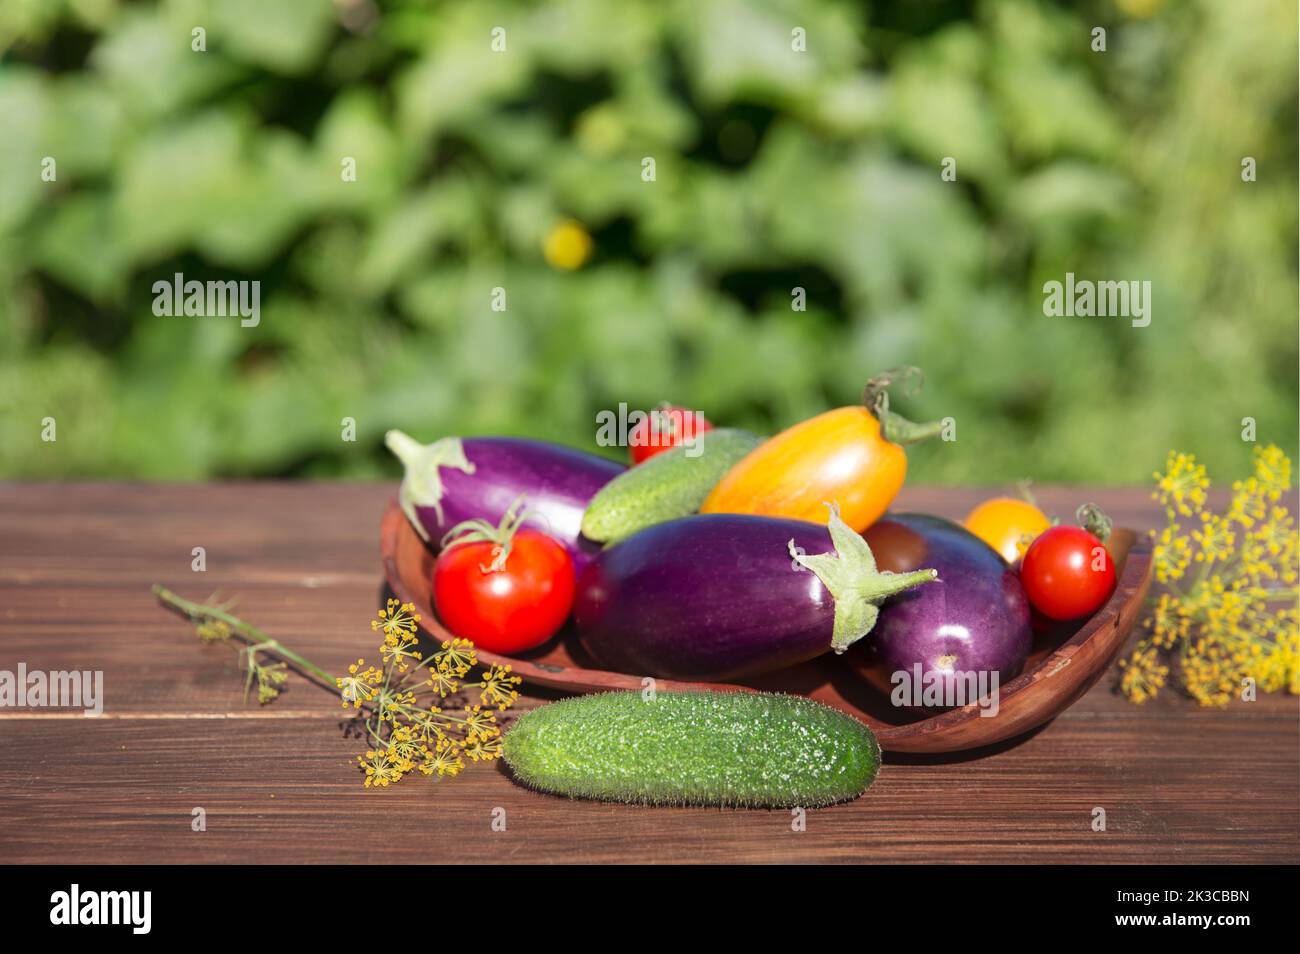 Fresh vegetables from the garden, eggplant, tomatoes, cucumbers, dill on a wooden table with blurred green background Stock Photo